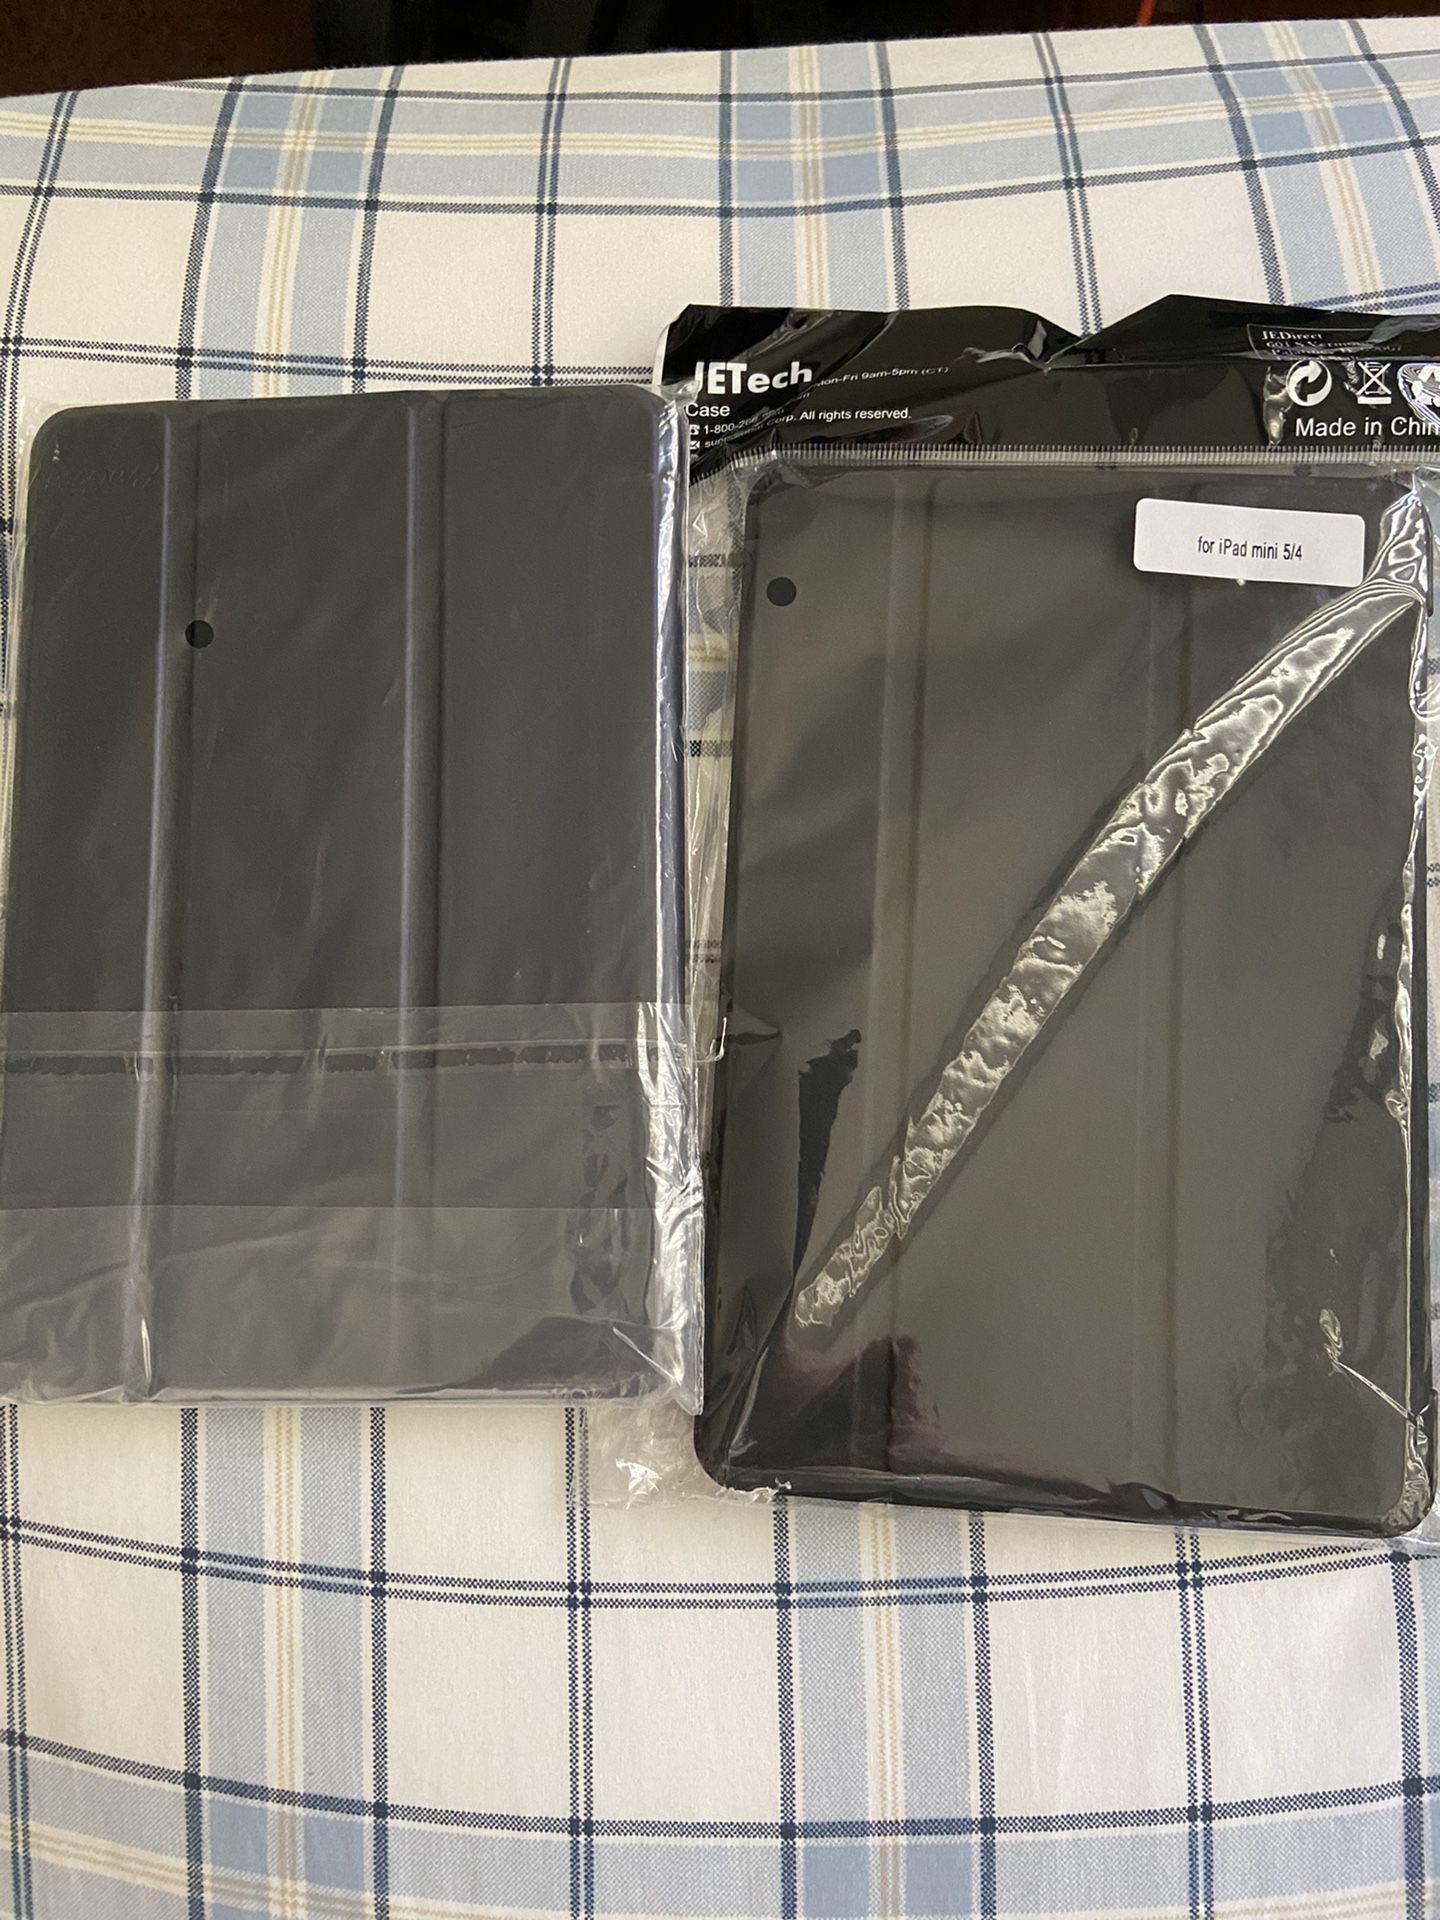 iPad mini cases for 4th and 5th generations